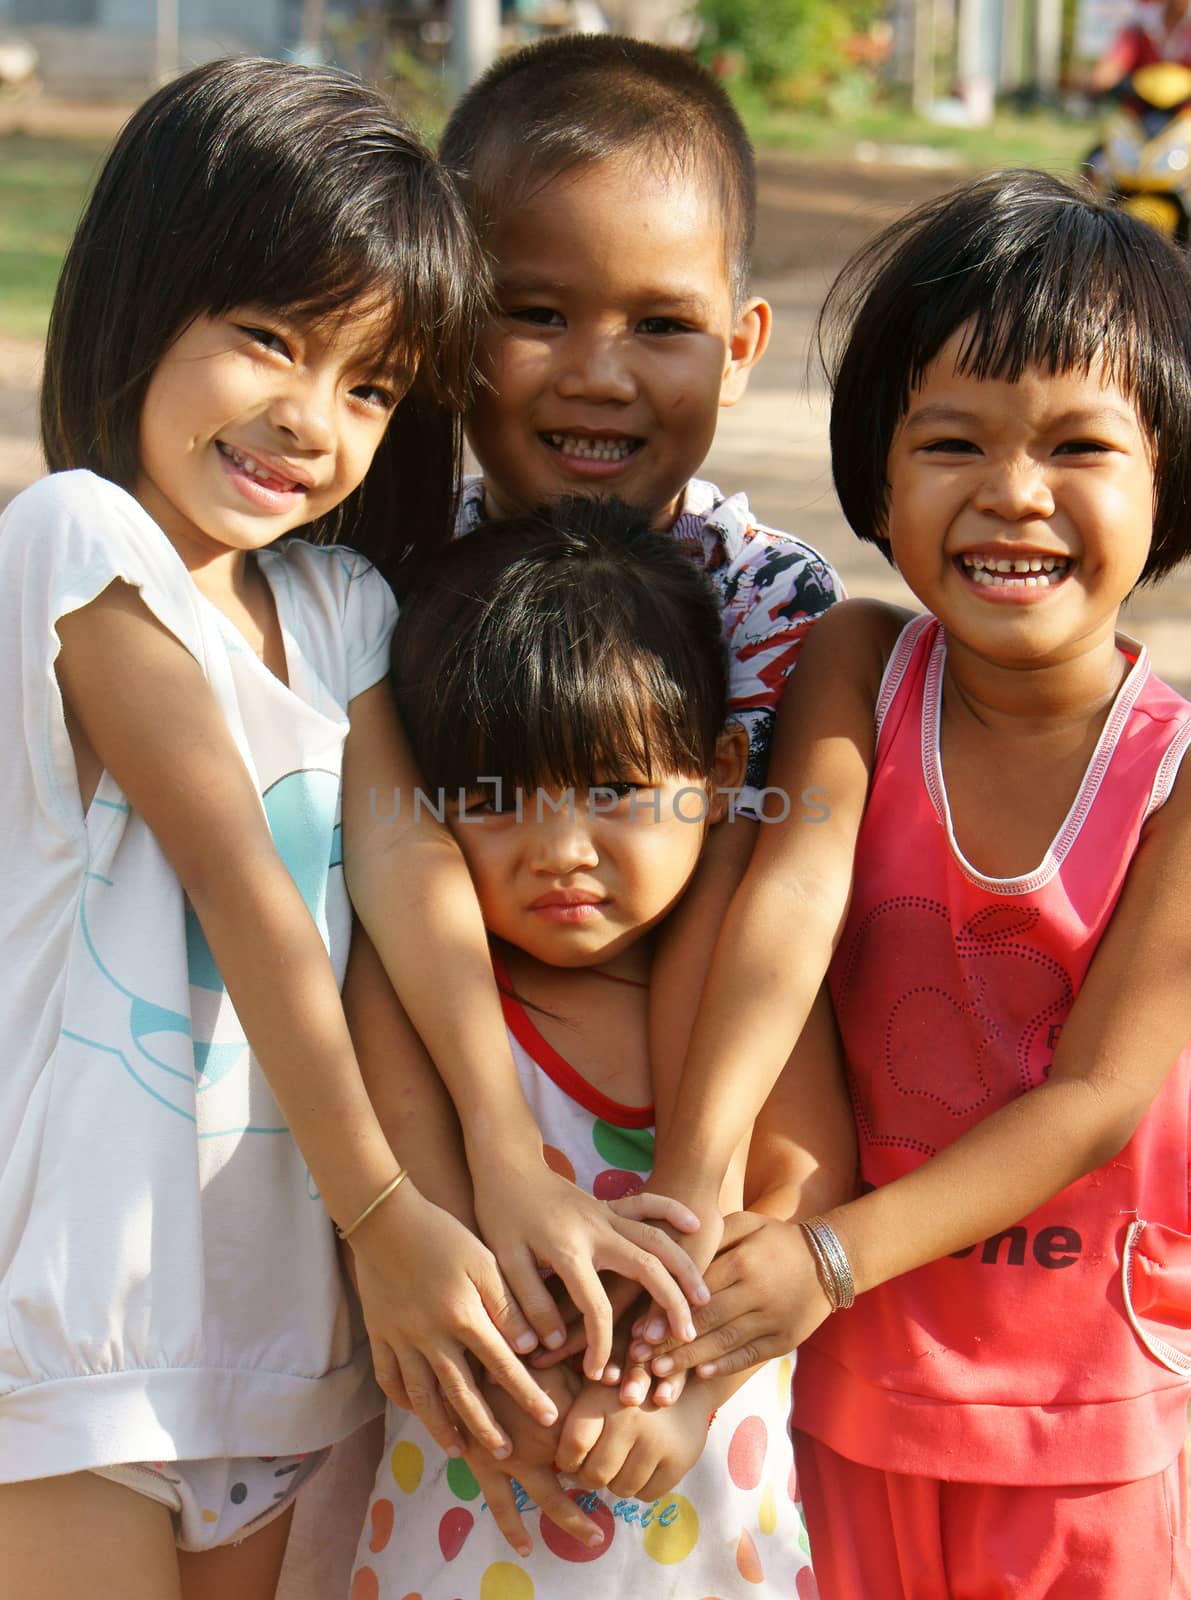 MEKONG DELTA, VIET NAM- SEPT 20: Group of unidentified Asian children have fun at Vietnamese country in sunny day, pretty, lovely face with innocent smile of Mekong Delta kid, Vietnam, Sept 20, 2014